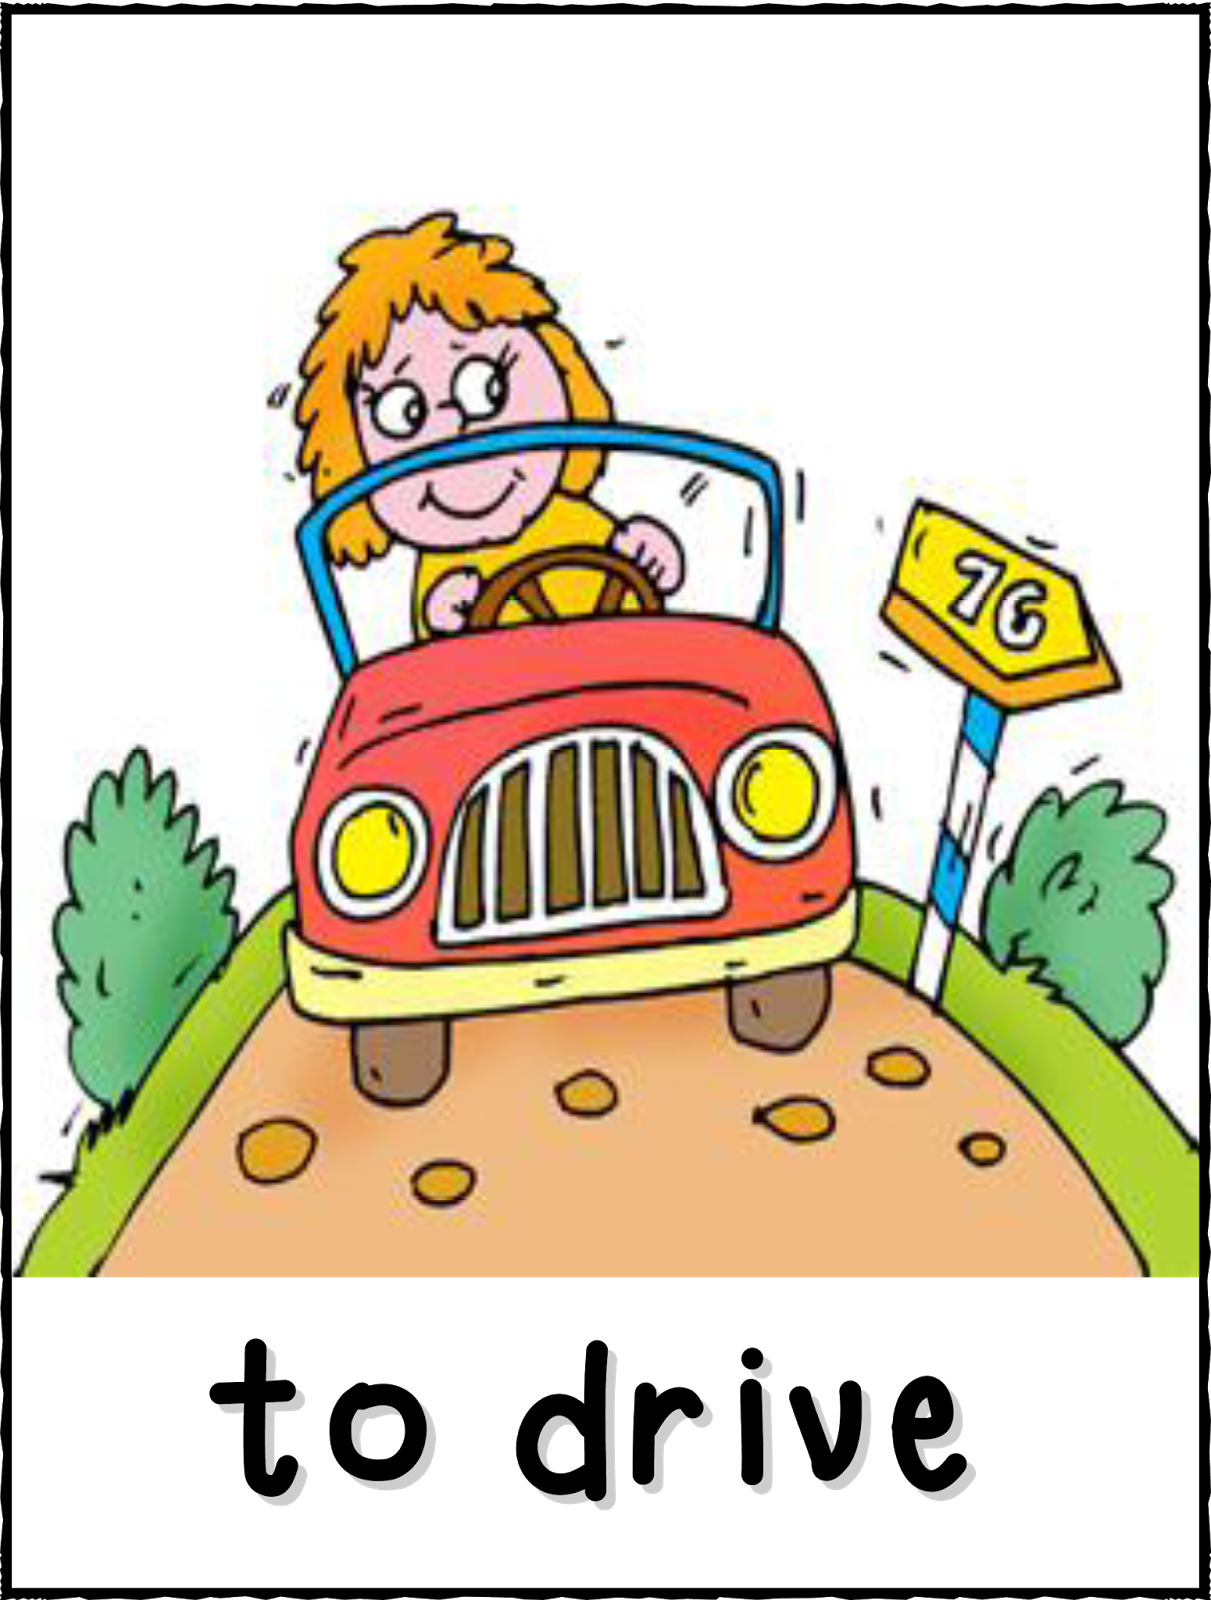 clipart images of verbs - photo #2